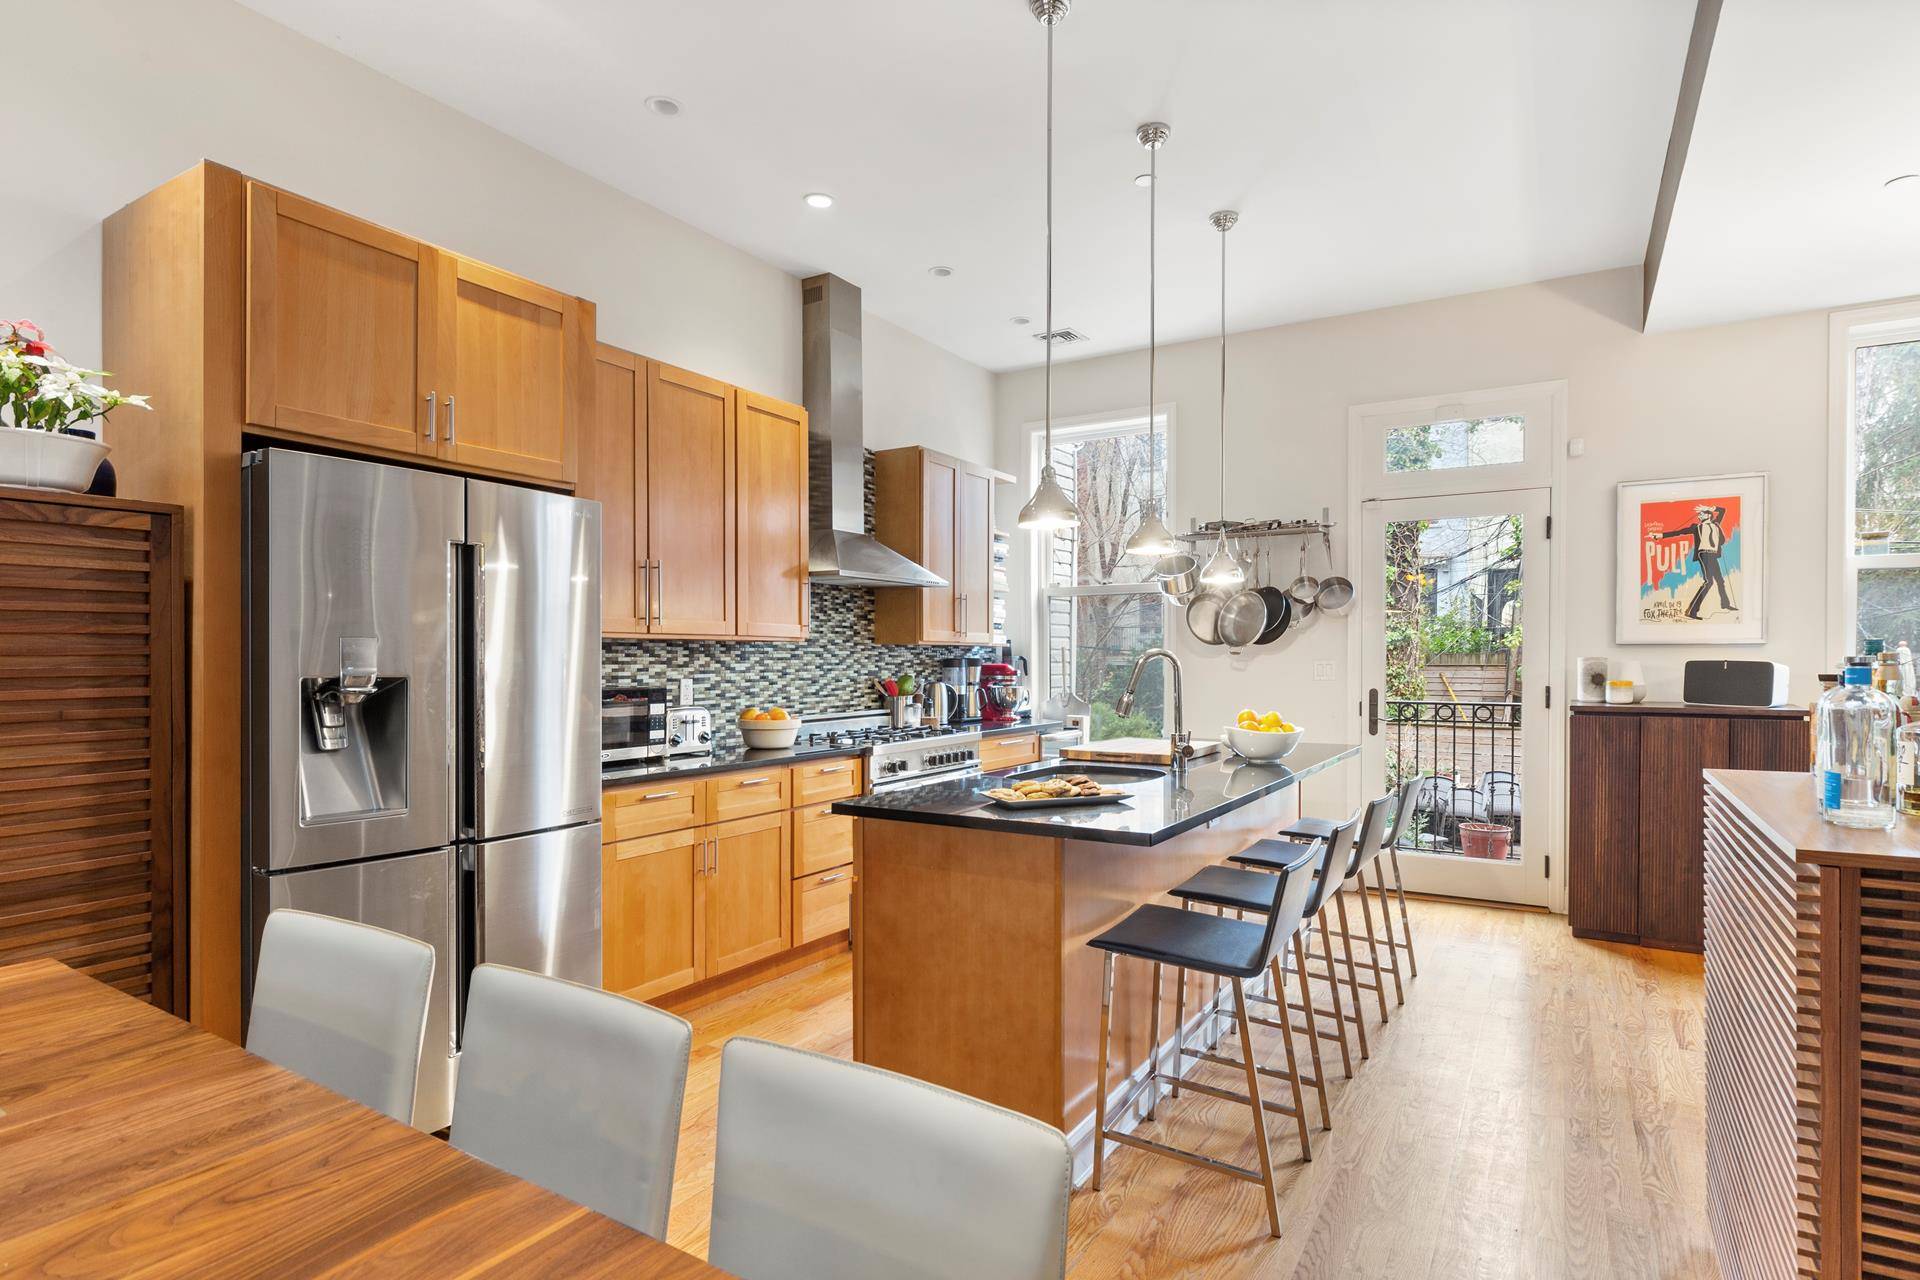 Boerum Hill beauty ; is an entertainer's dream apartment.